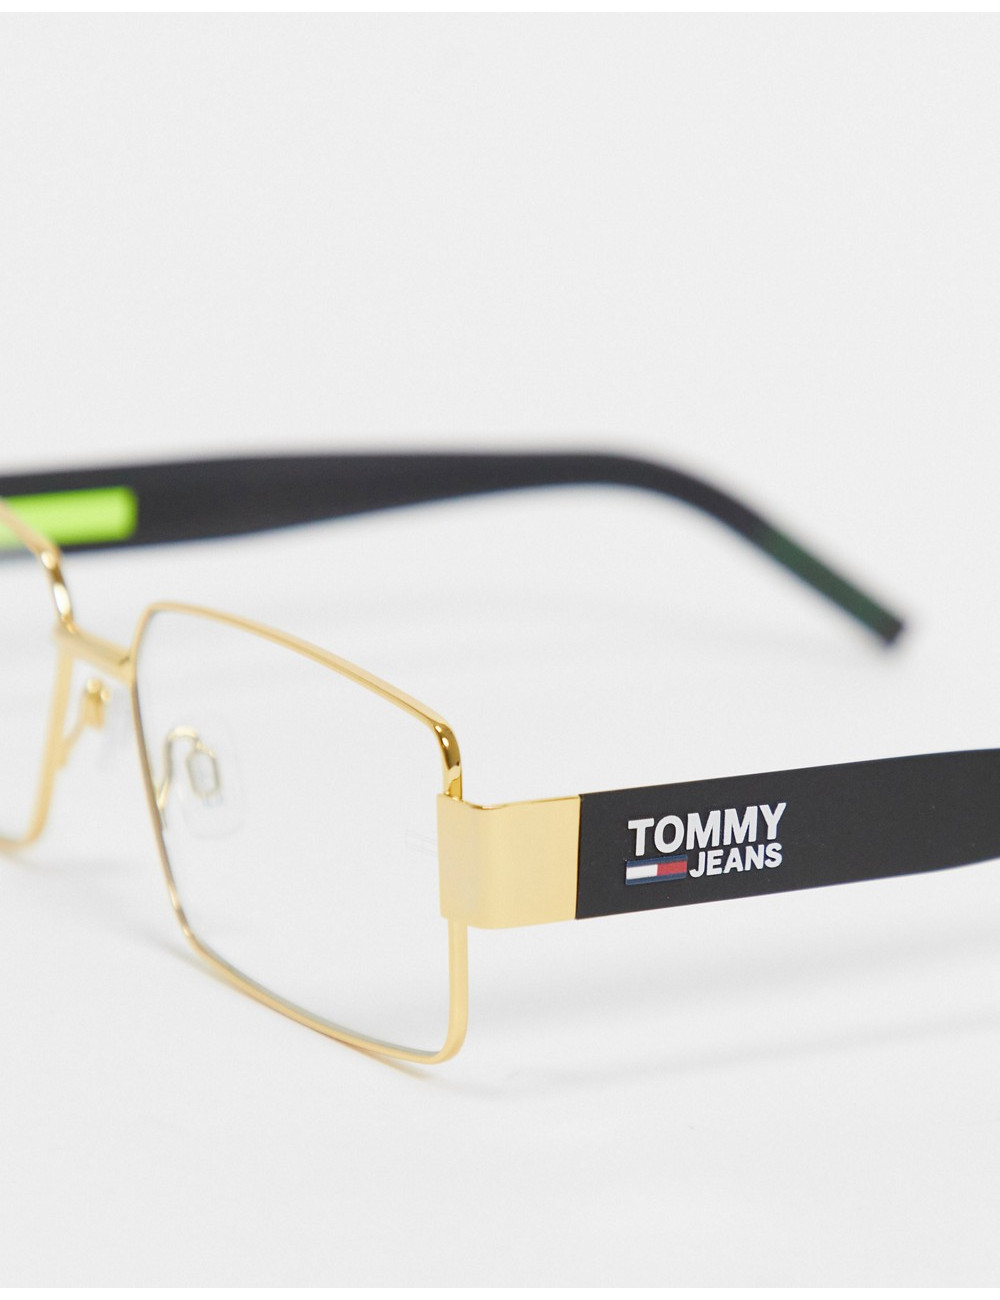 Tommy Jeans 0005/S tinted...